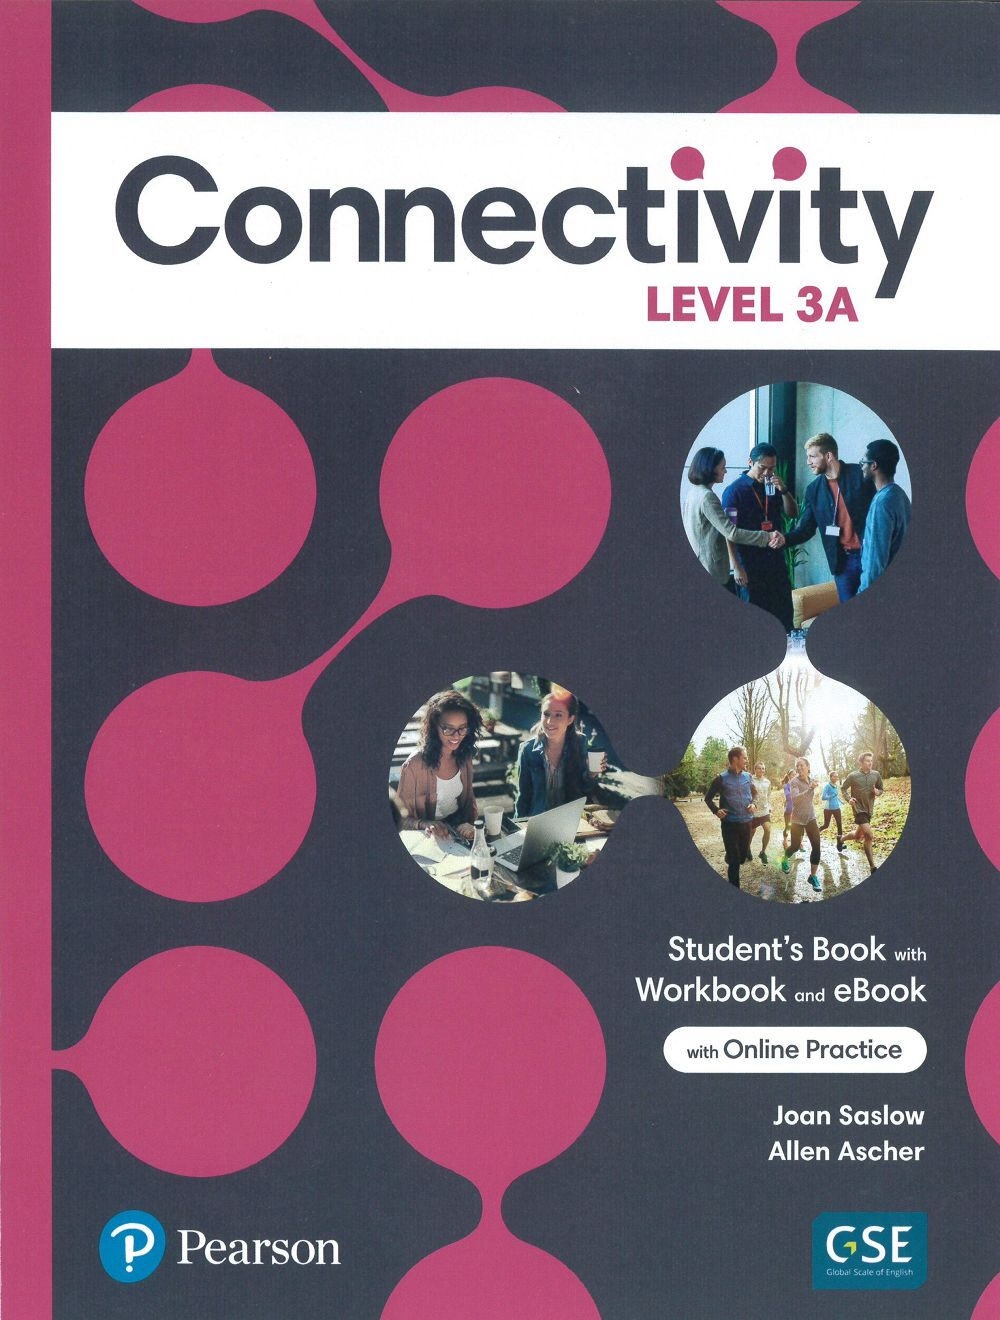 Connectivity (3A) Student’s Book with Workbook and eBook with Online Practice